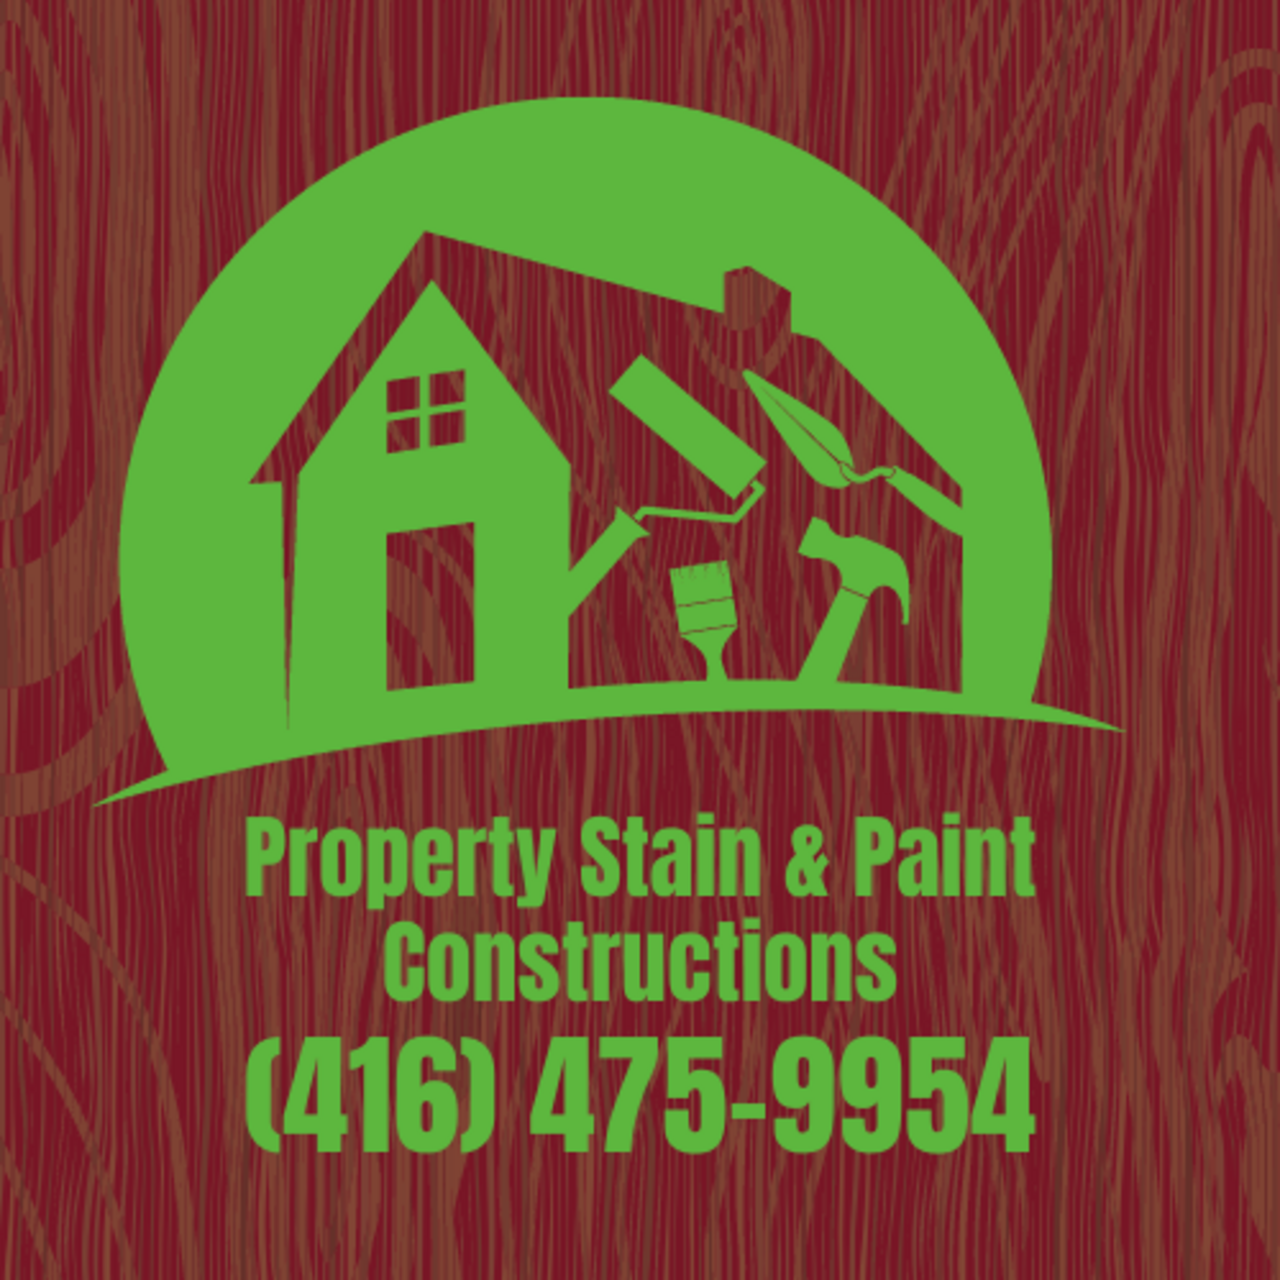 Property stain and paint contraction 's logo